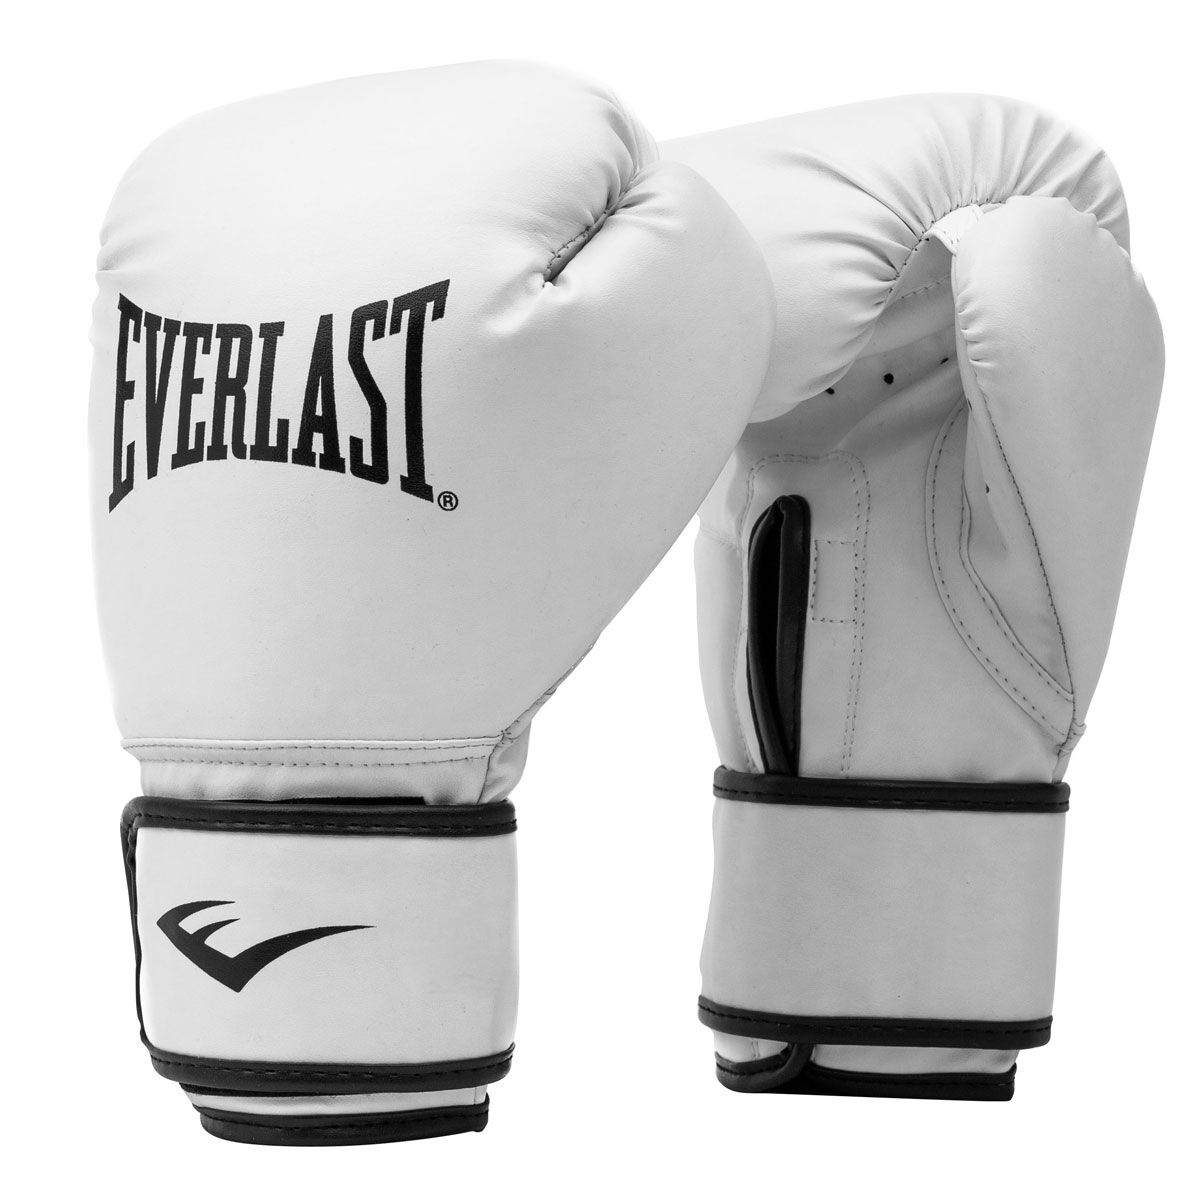 Punching Bags for Boxing, Special Offer - brand Adidas - inSPORTline